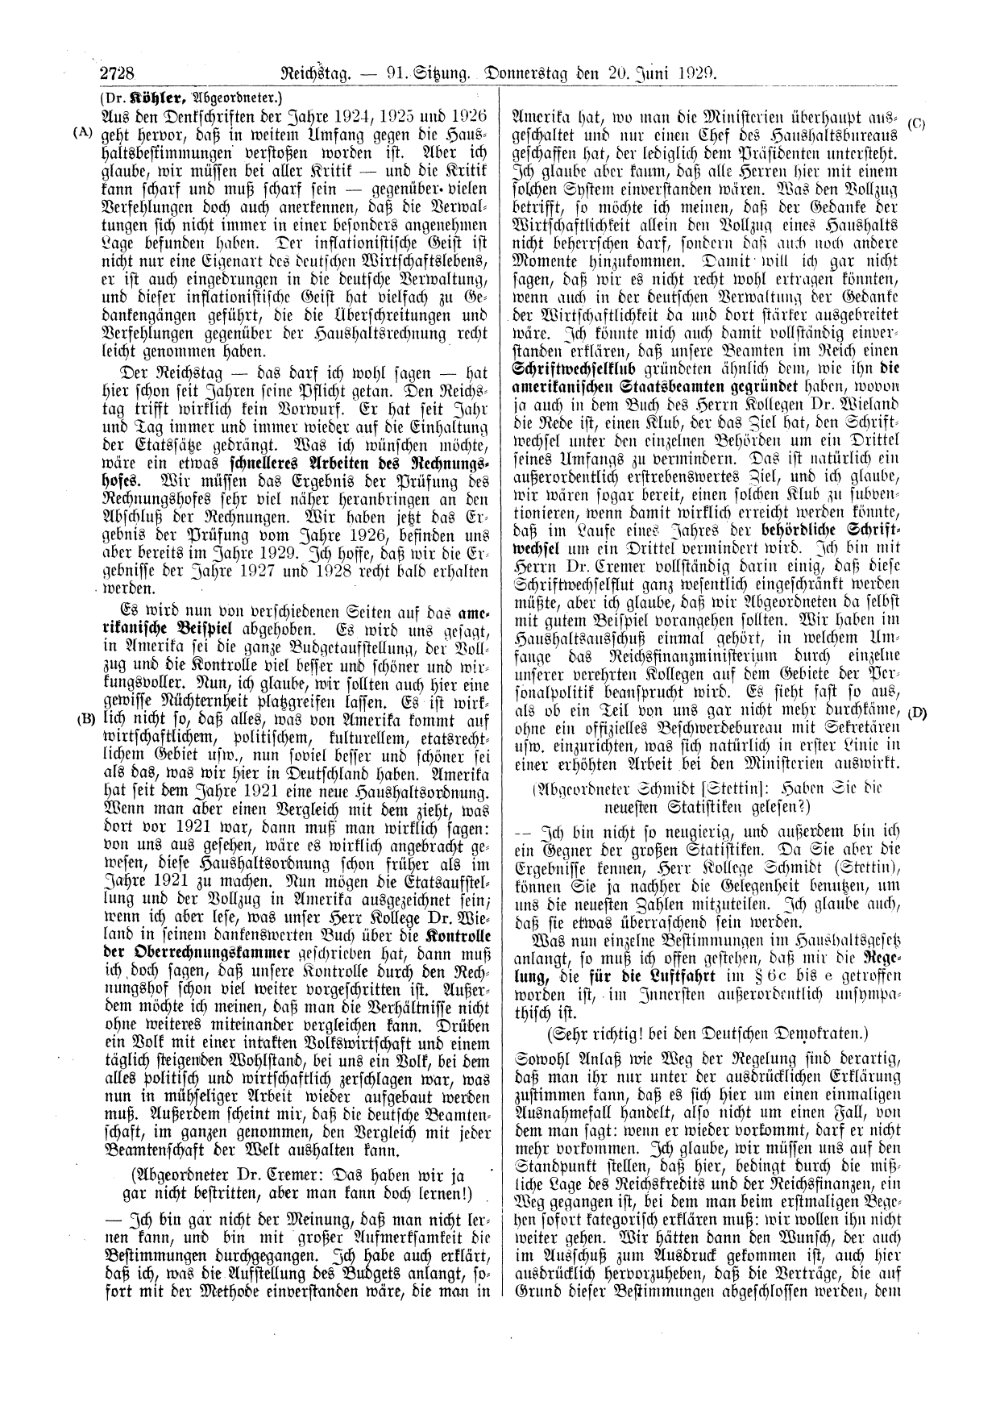 Scan of page 2728